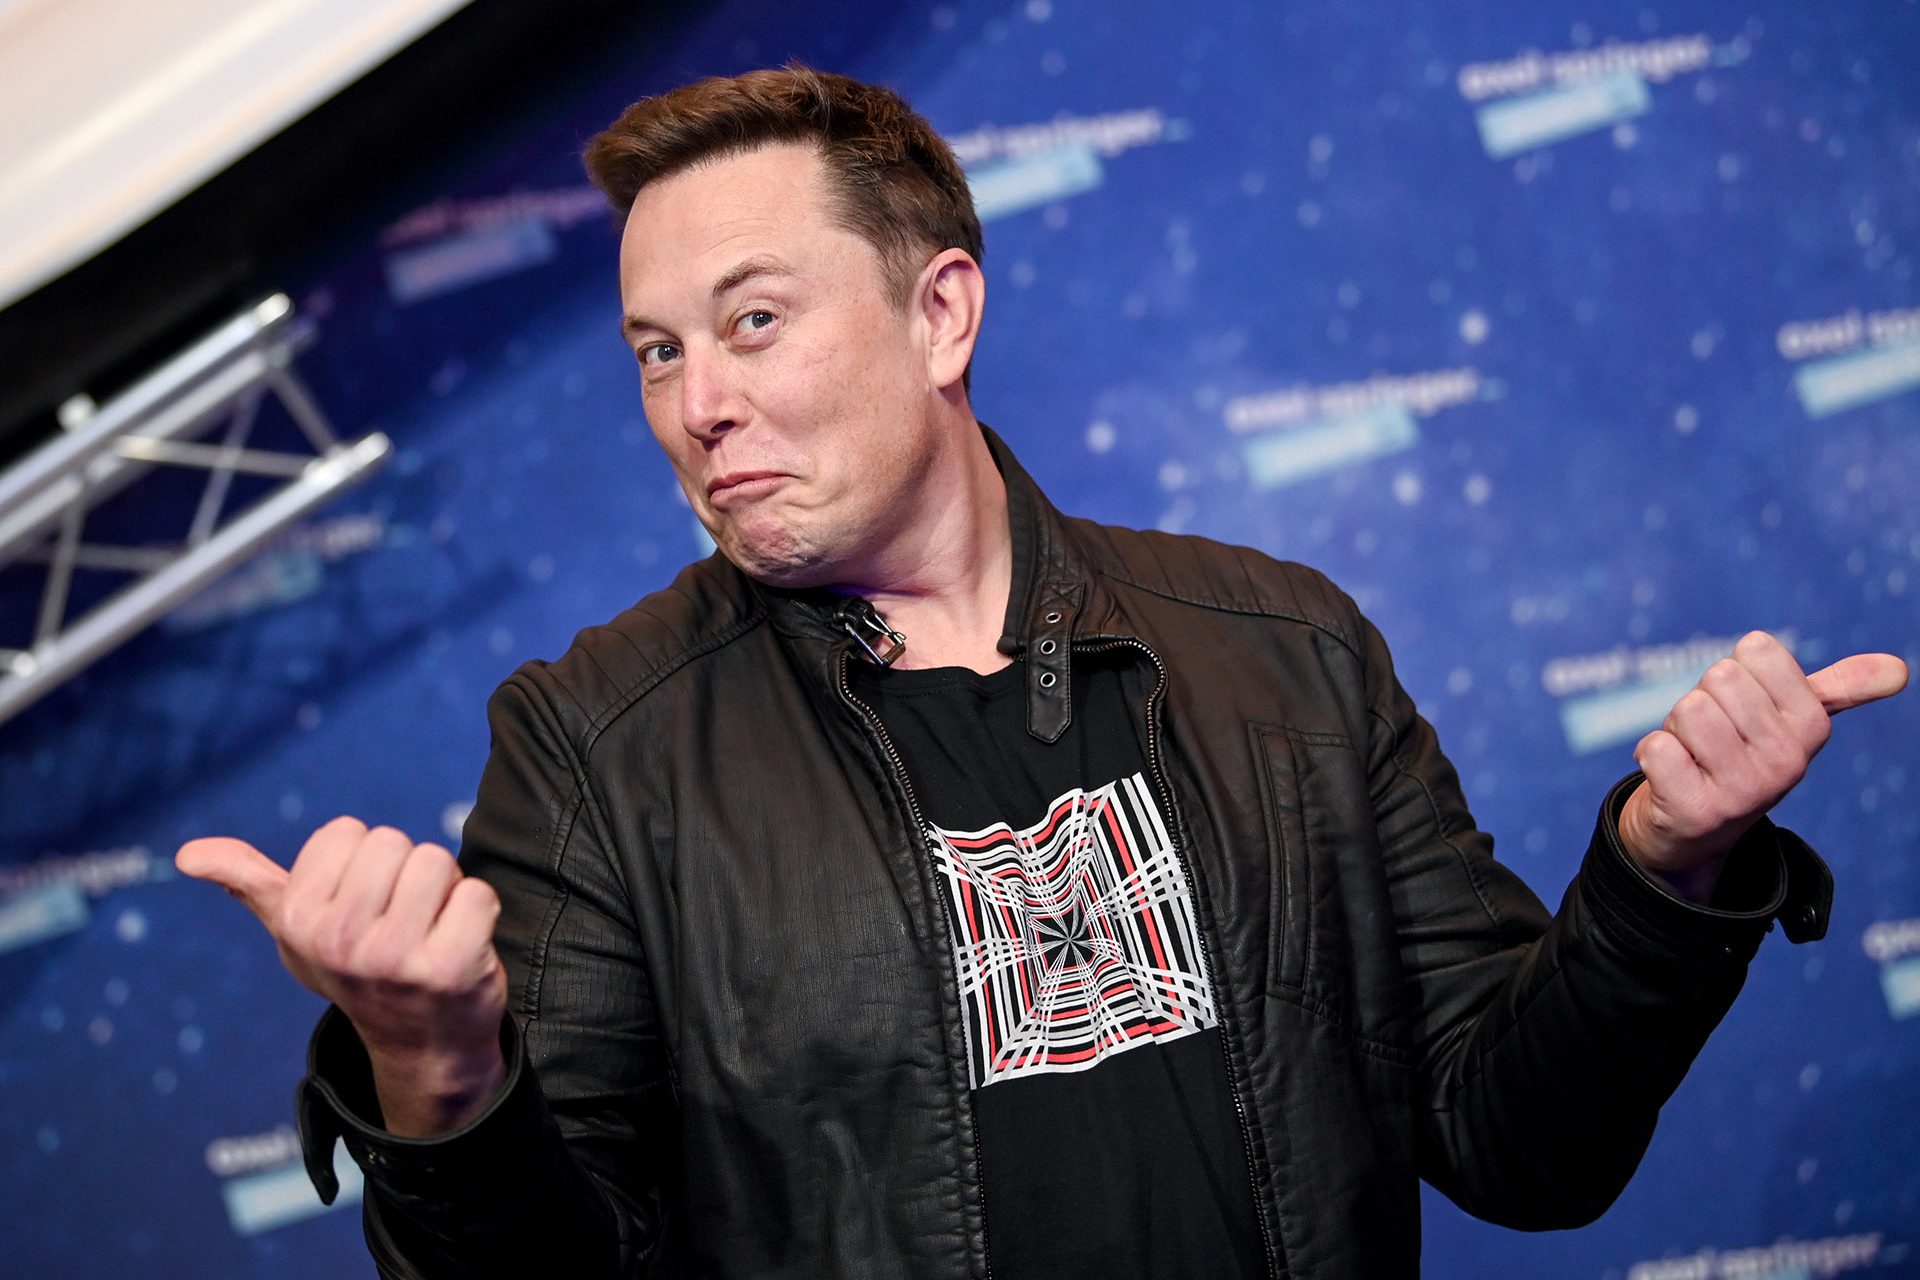 Musk believes implants could cure many other conditions, enable telepathy and web browsing